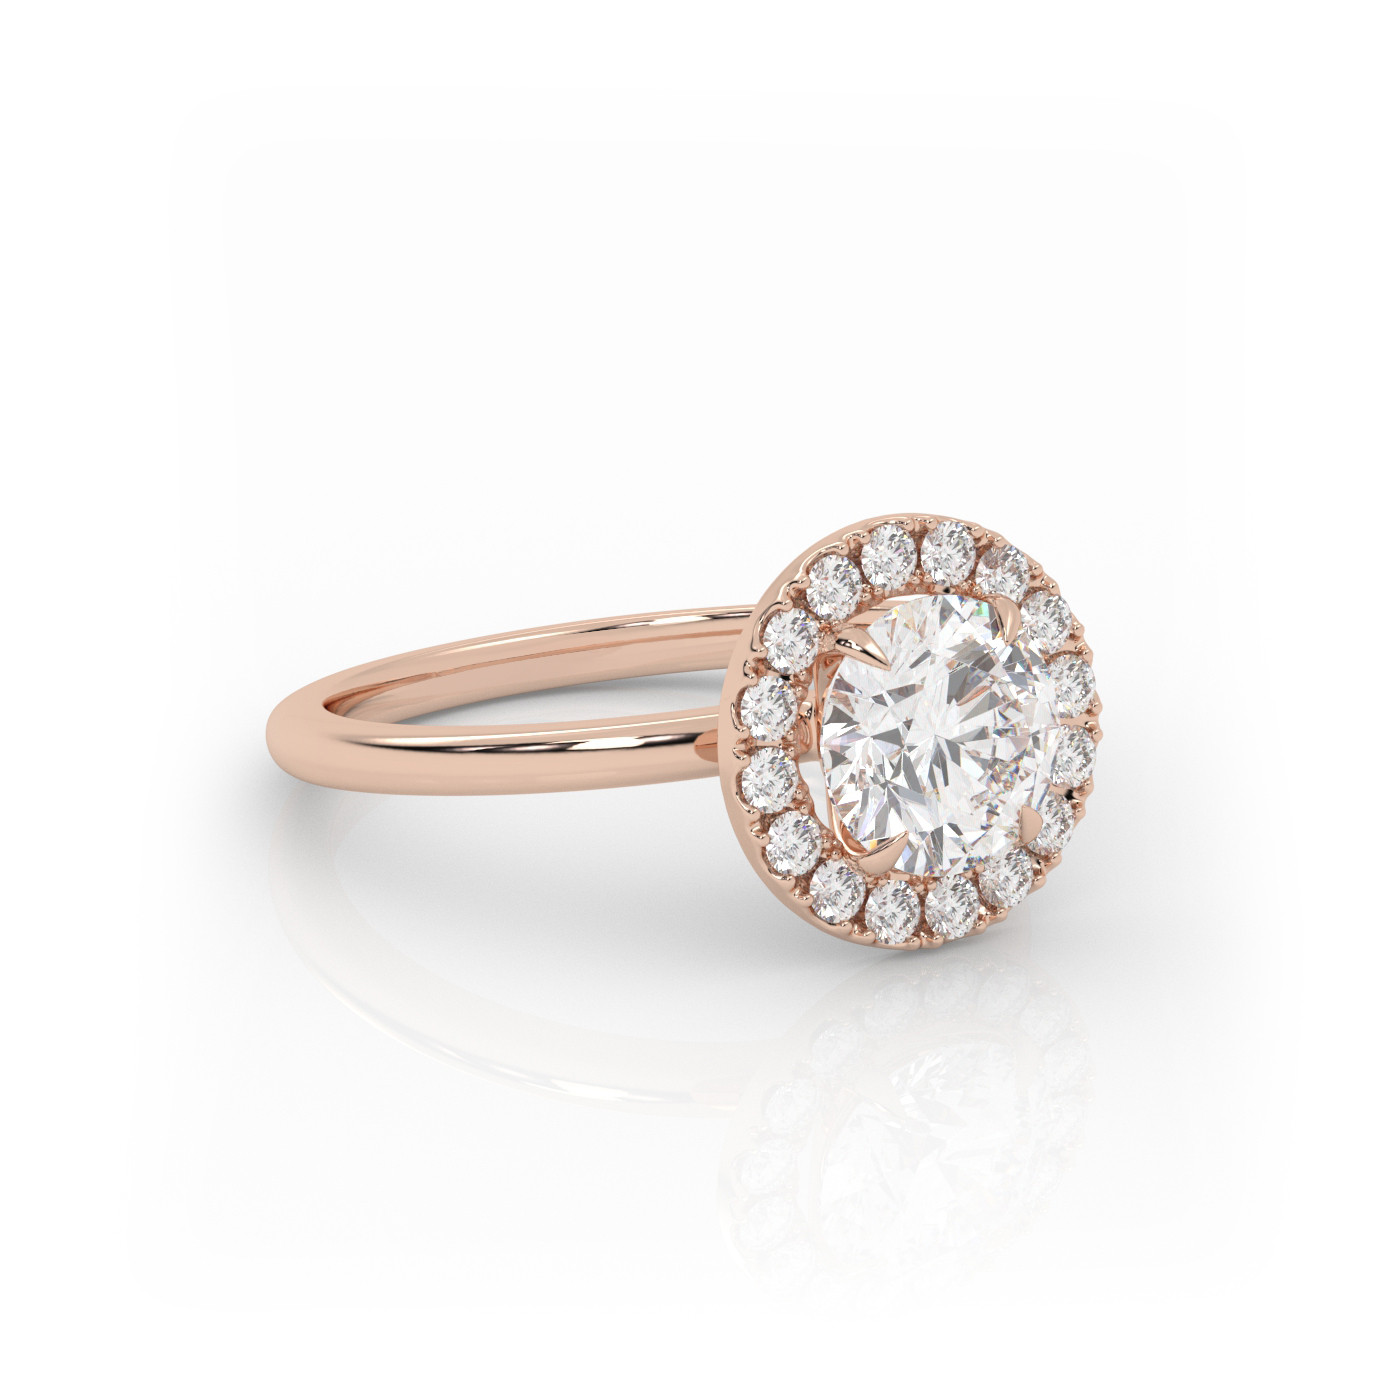 18K ROSE GOLD Round Diamond Cut Engagement Ring with Halo Style